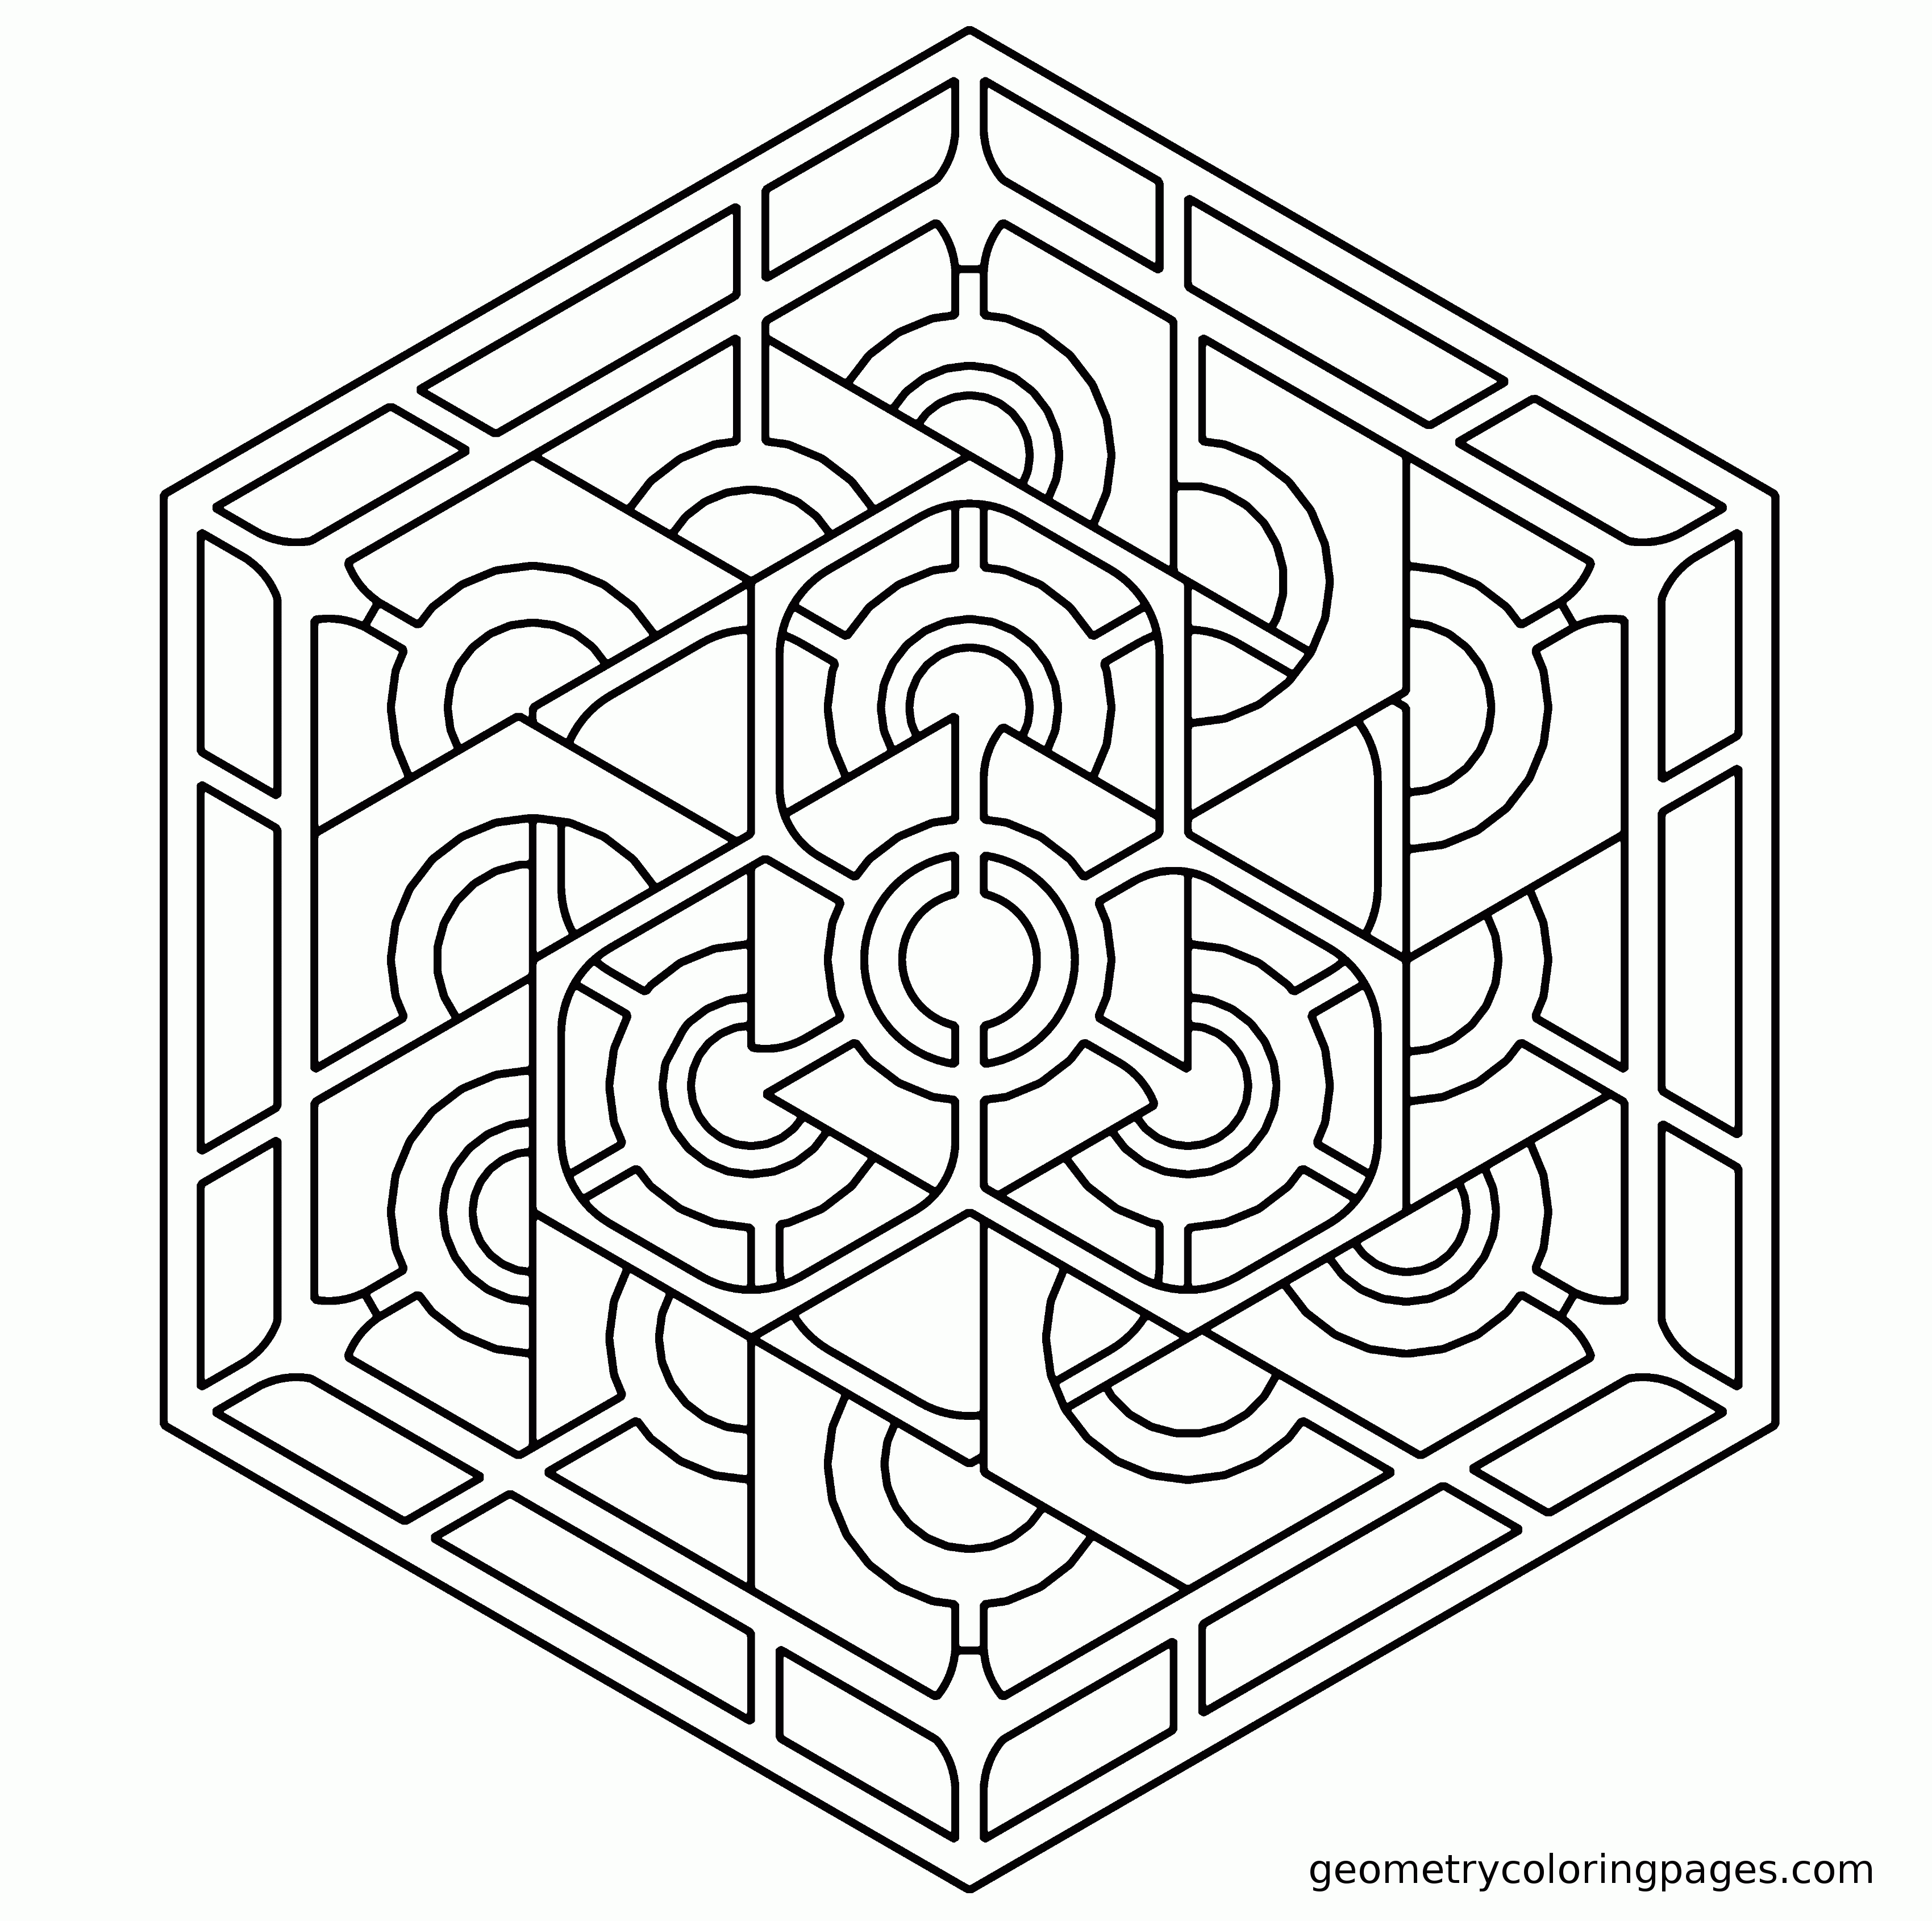 3D Pattern Coloring Pages For Adults - Coloring Pages For All Ages